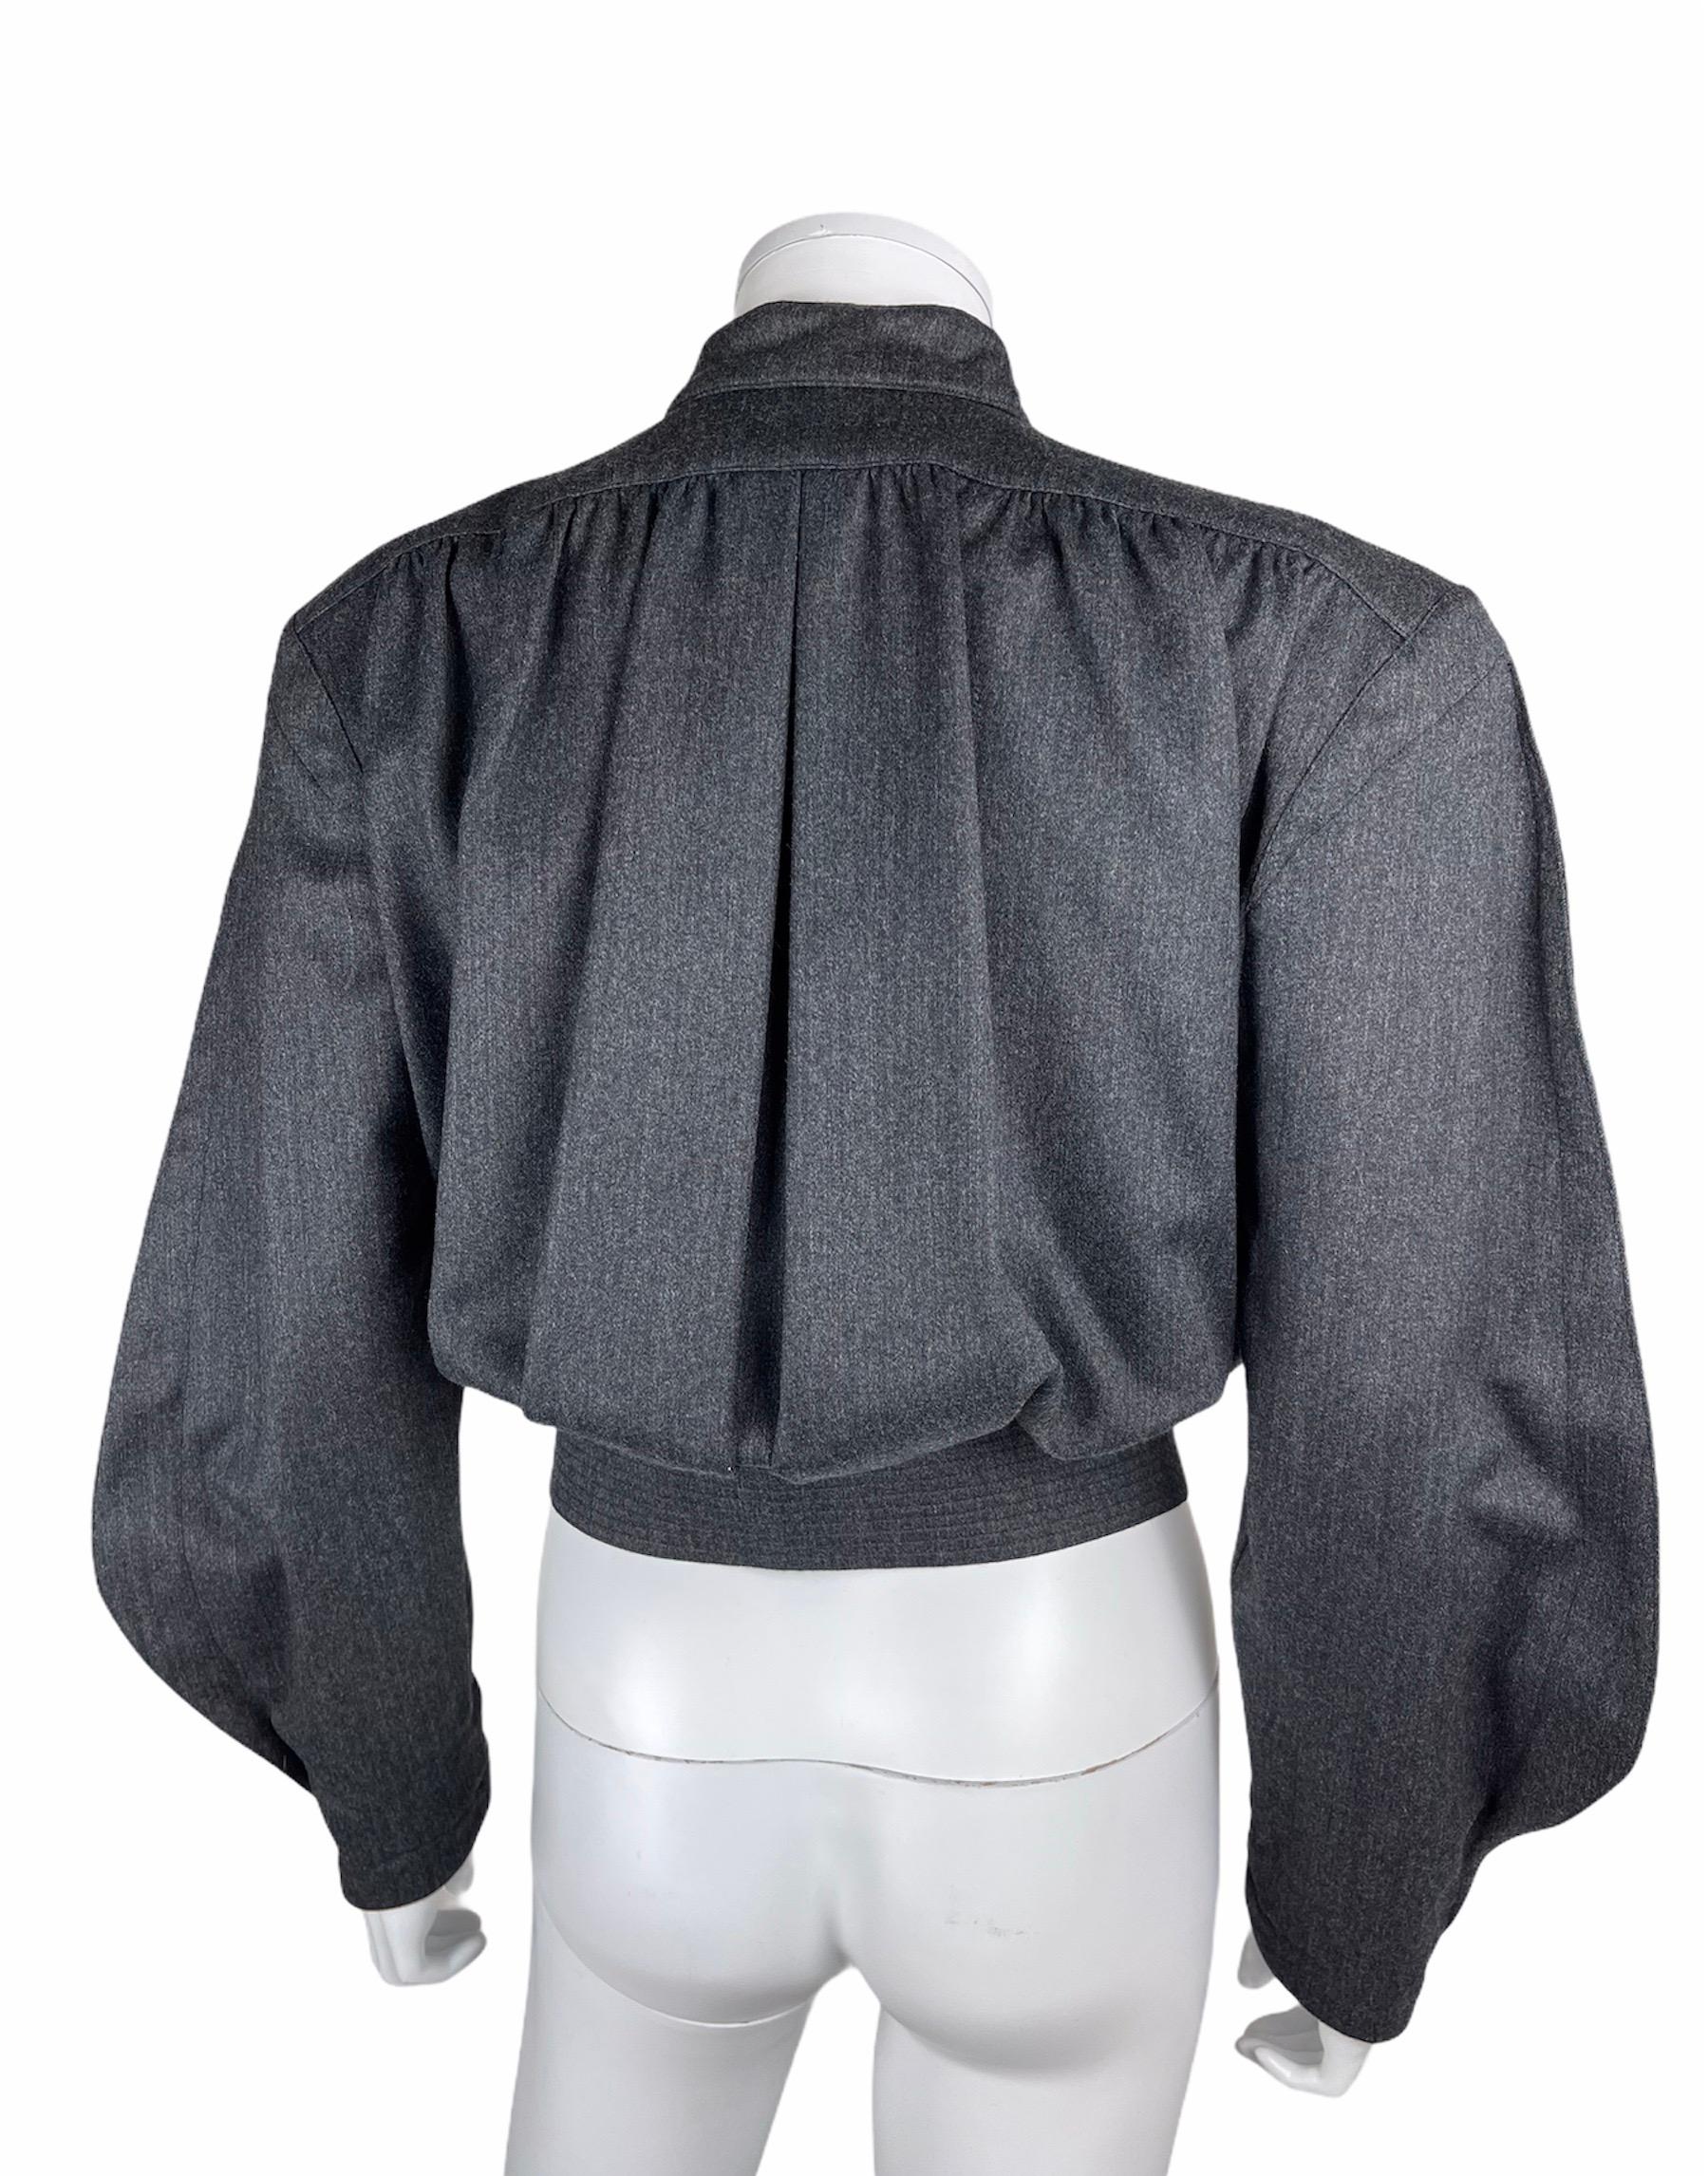 FW86 Thierry Mugler Space Age / Soviet Union Jacket Bold Shoulders Belted Waist 4